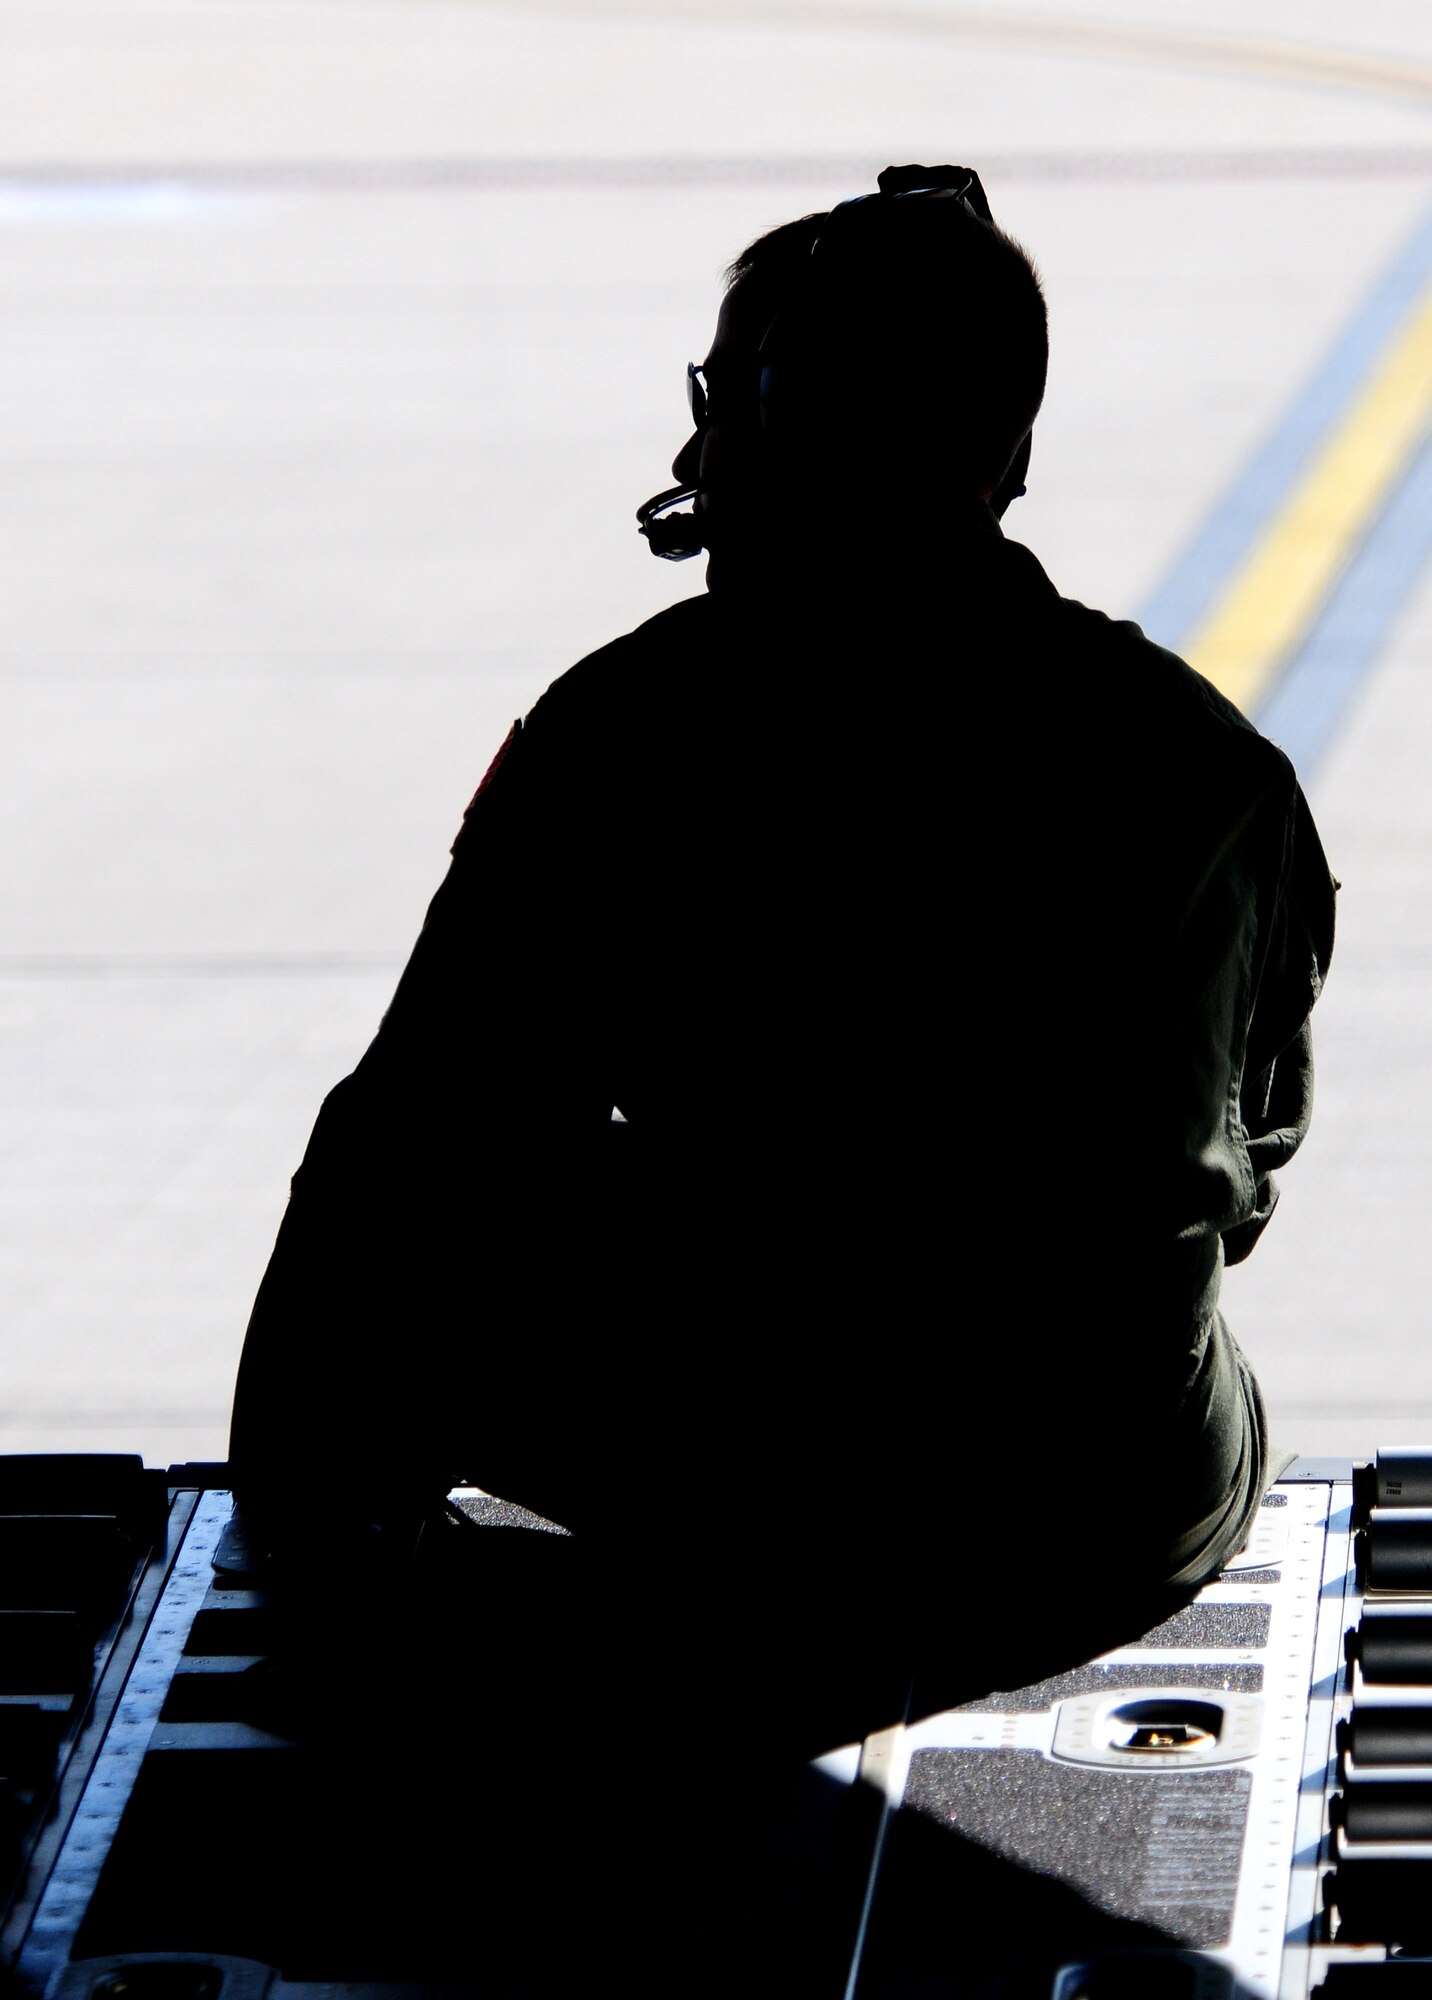 U.S. Air Force Staff Sgt. Francesco "Ace" Ventura, a load master/evaluator, with the 37th Airlift Squadron sits on a C-130J ramp as the crew prepares to take off for a flight from Ramstein AB, Germany on Sept 23, 2009. (U.S. Staff Sgt. Jocelyn Rich) 